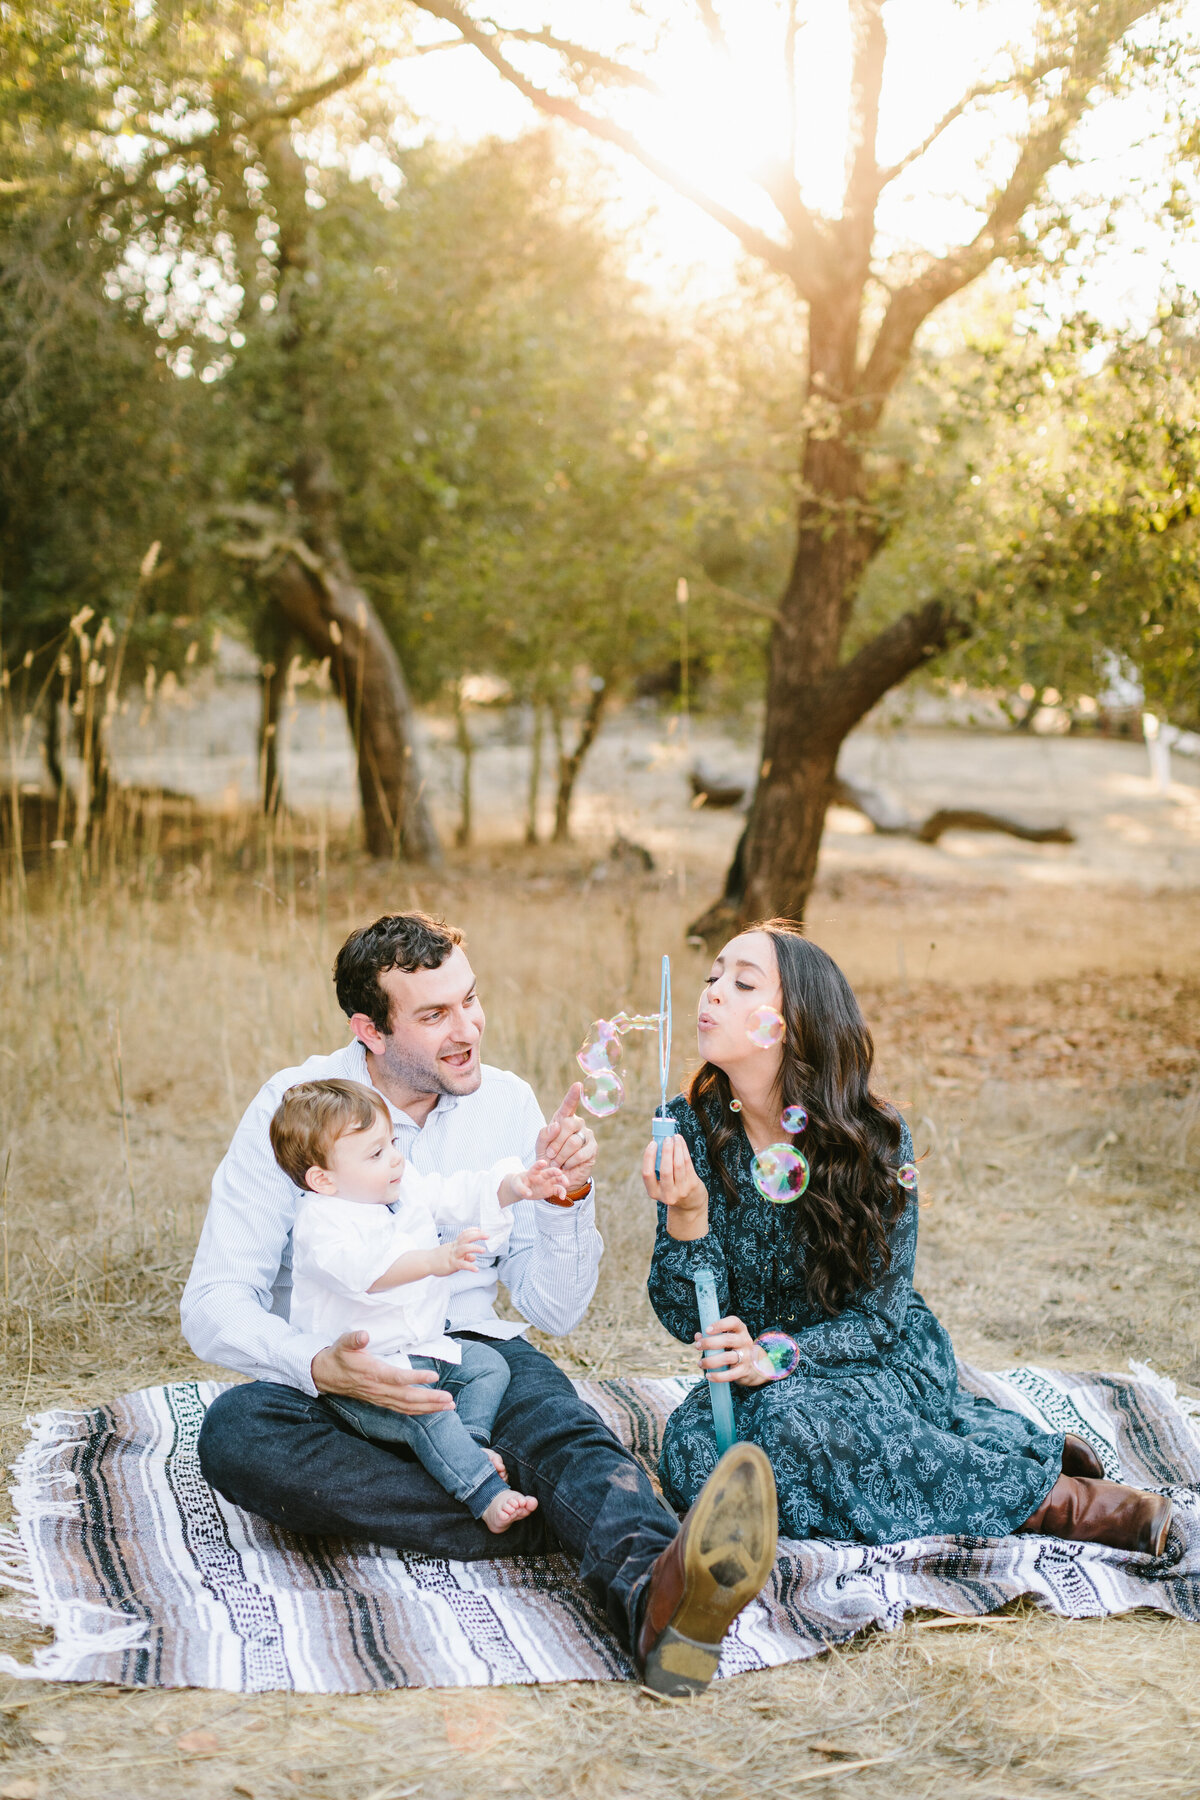 Best California and Texas Family Photographer-Jodee Debes Photography-113